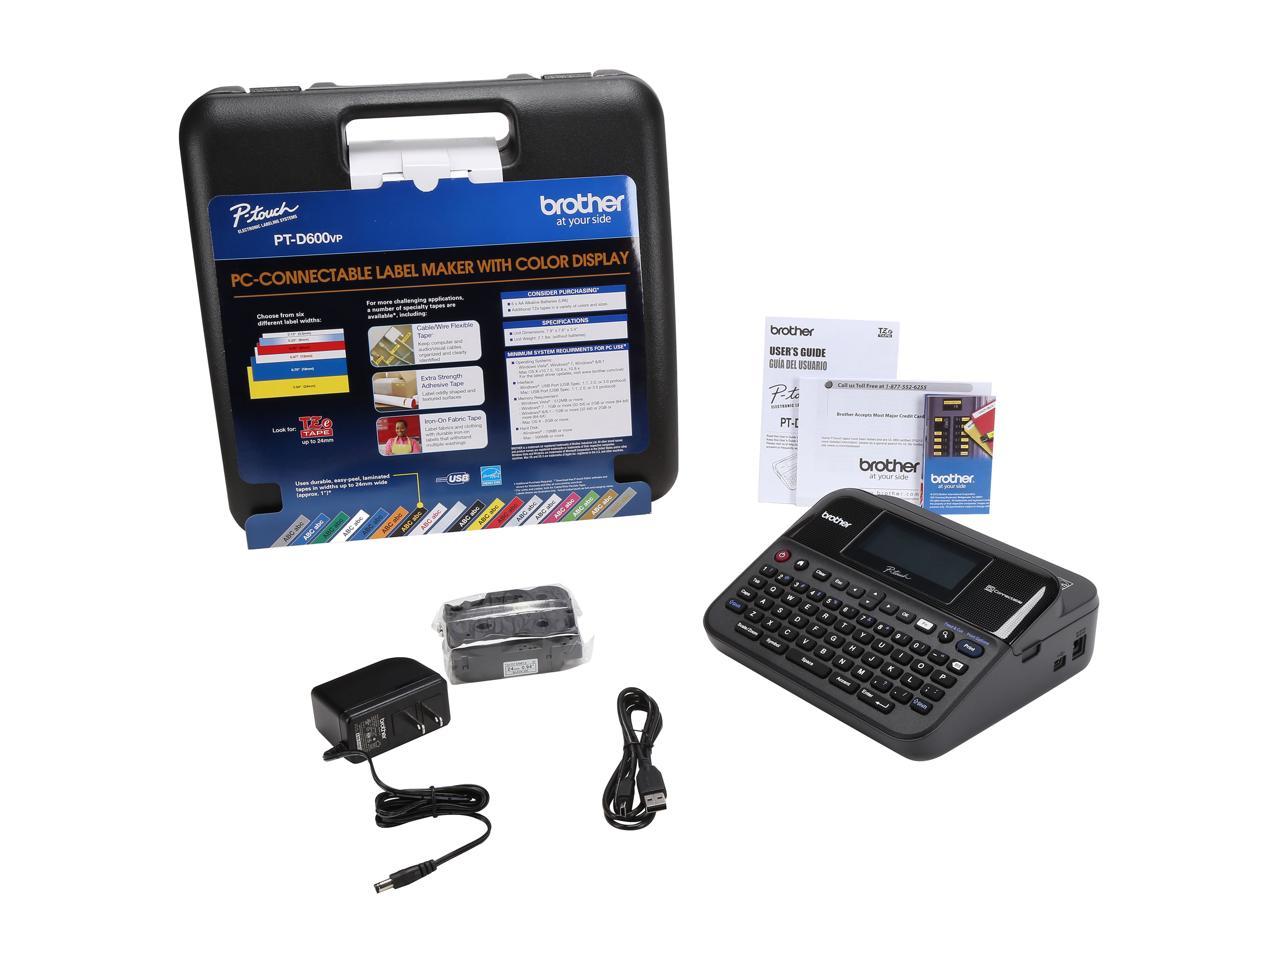 Brother P-Touch PT-D600VP PC-Connectable Label Maker with Color Display and Carry Case